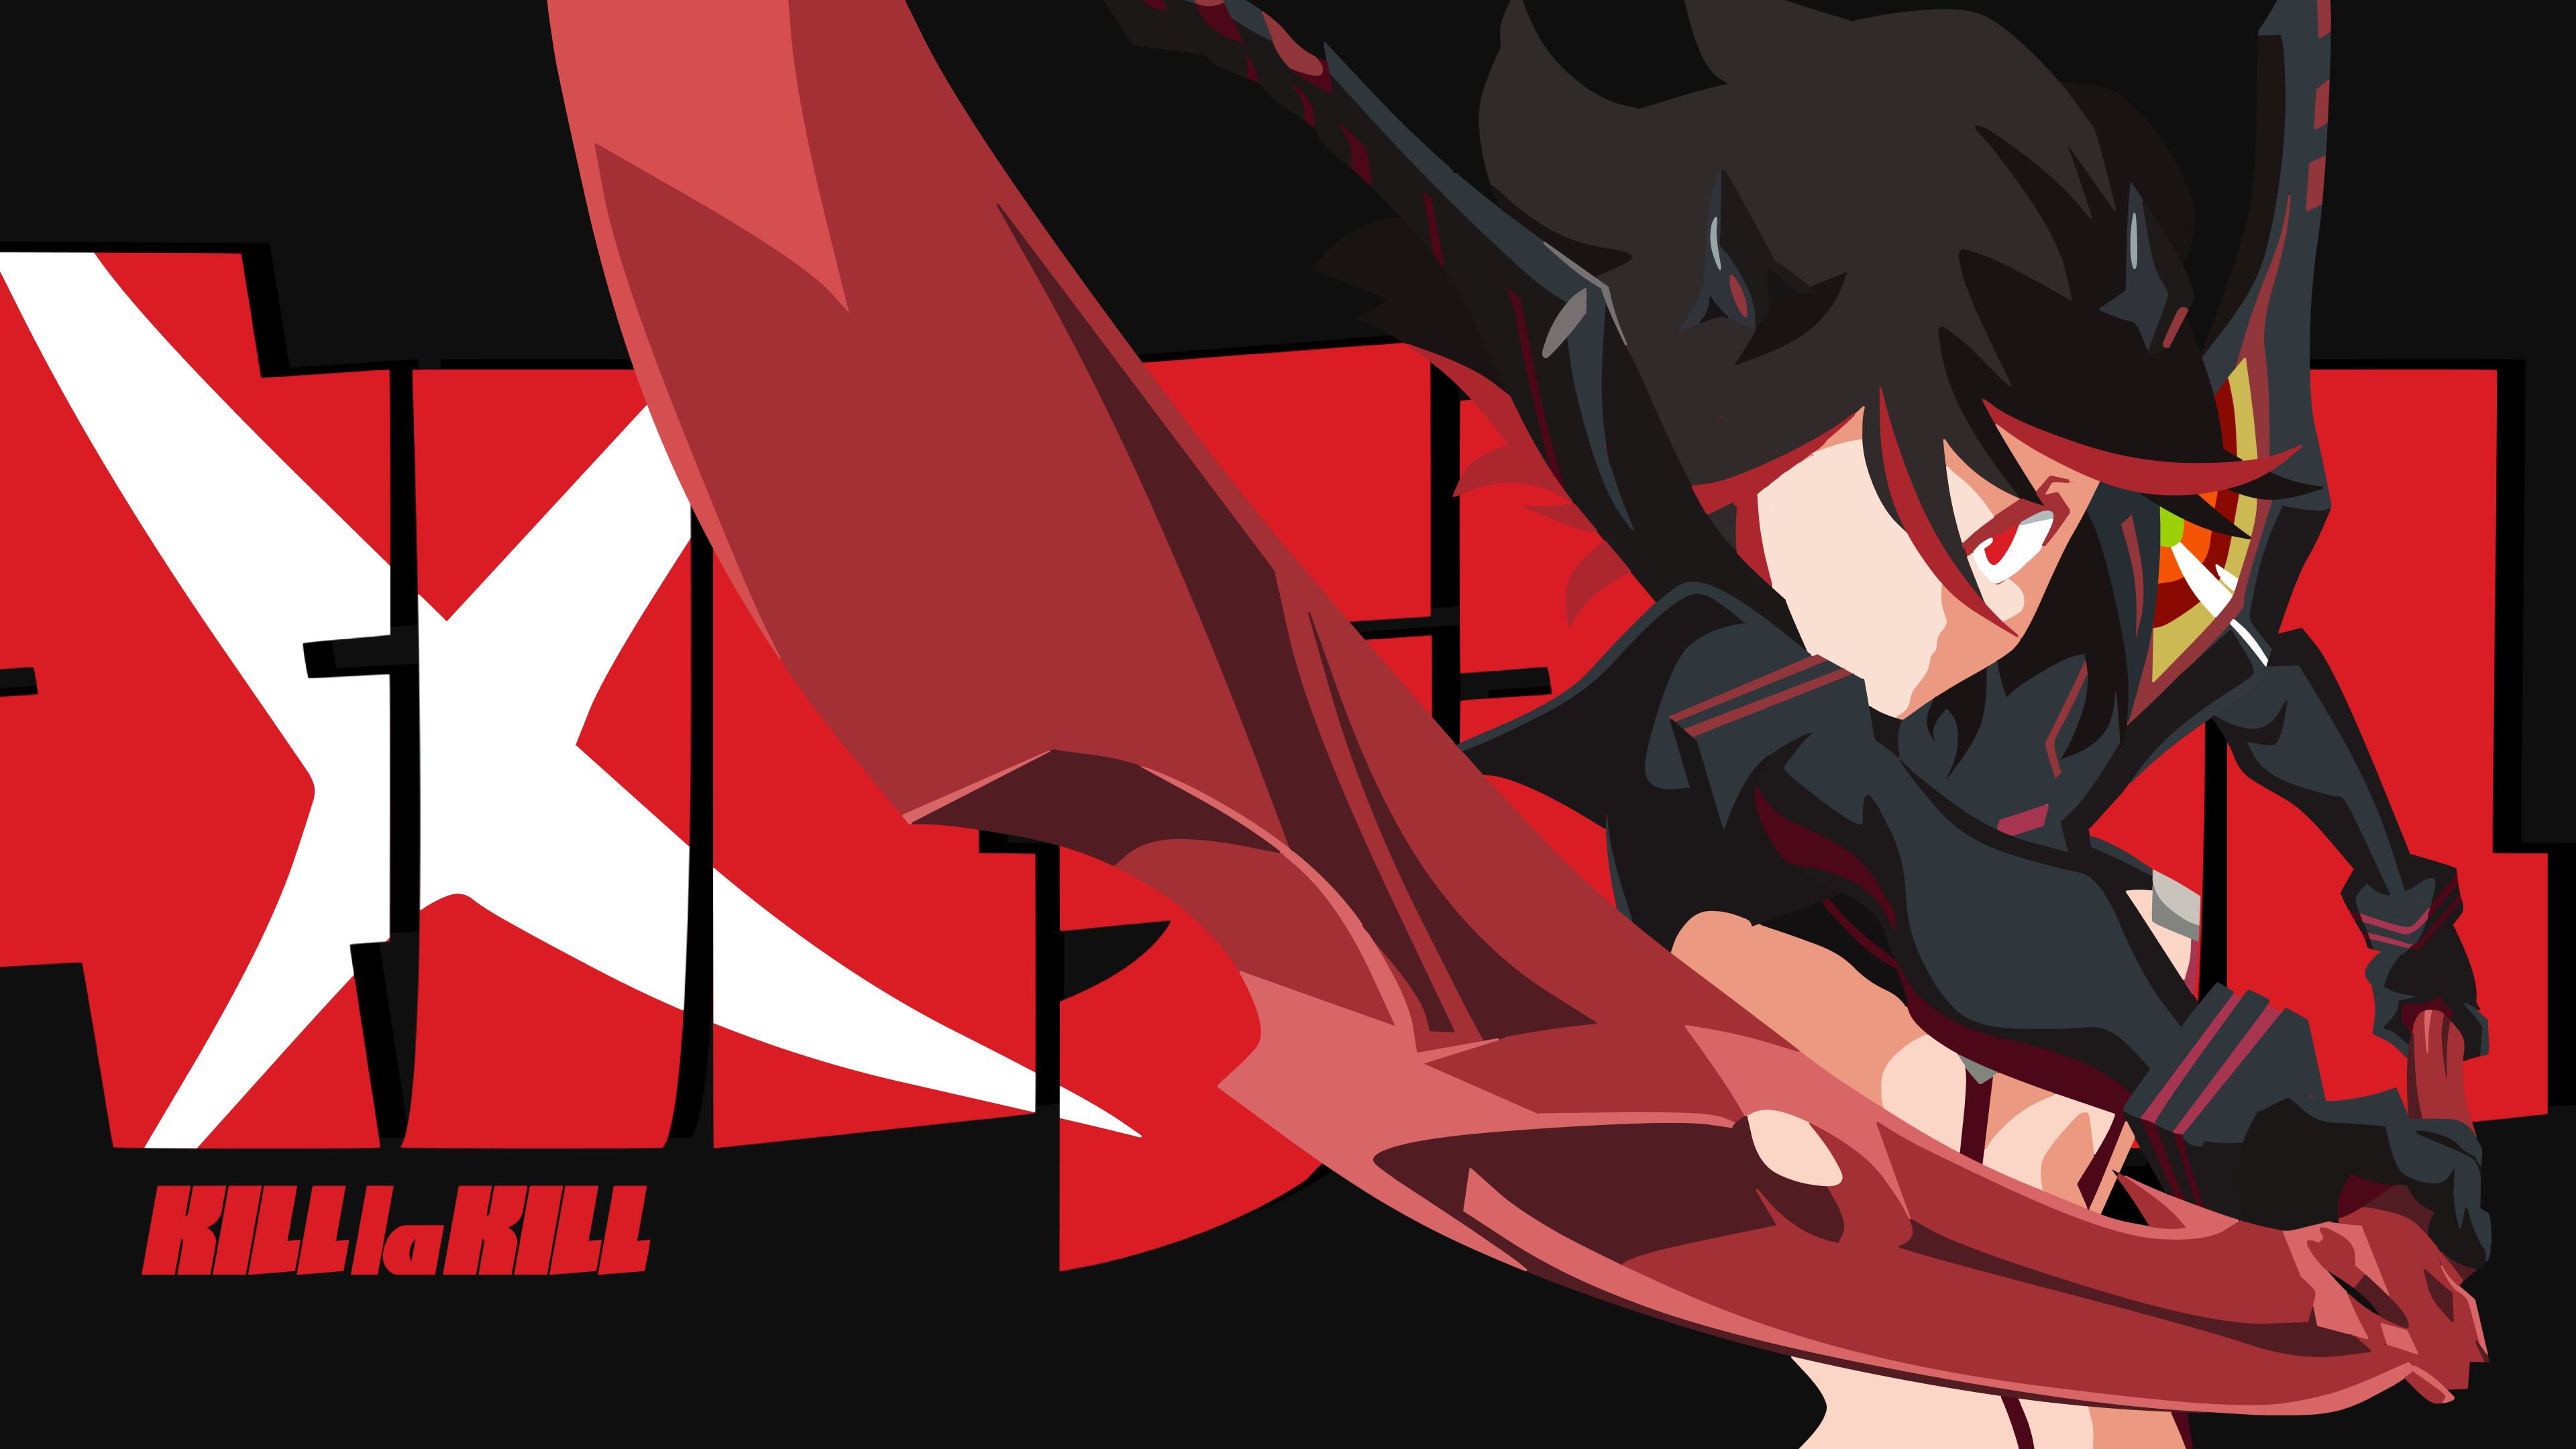 250 Ryūko Matoi HD Wallpapers and Backgrounds